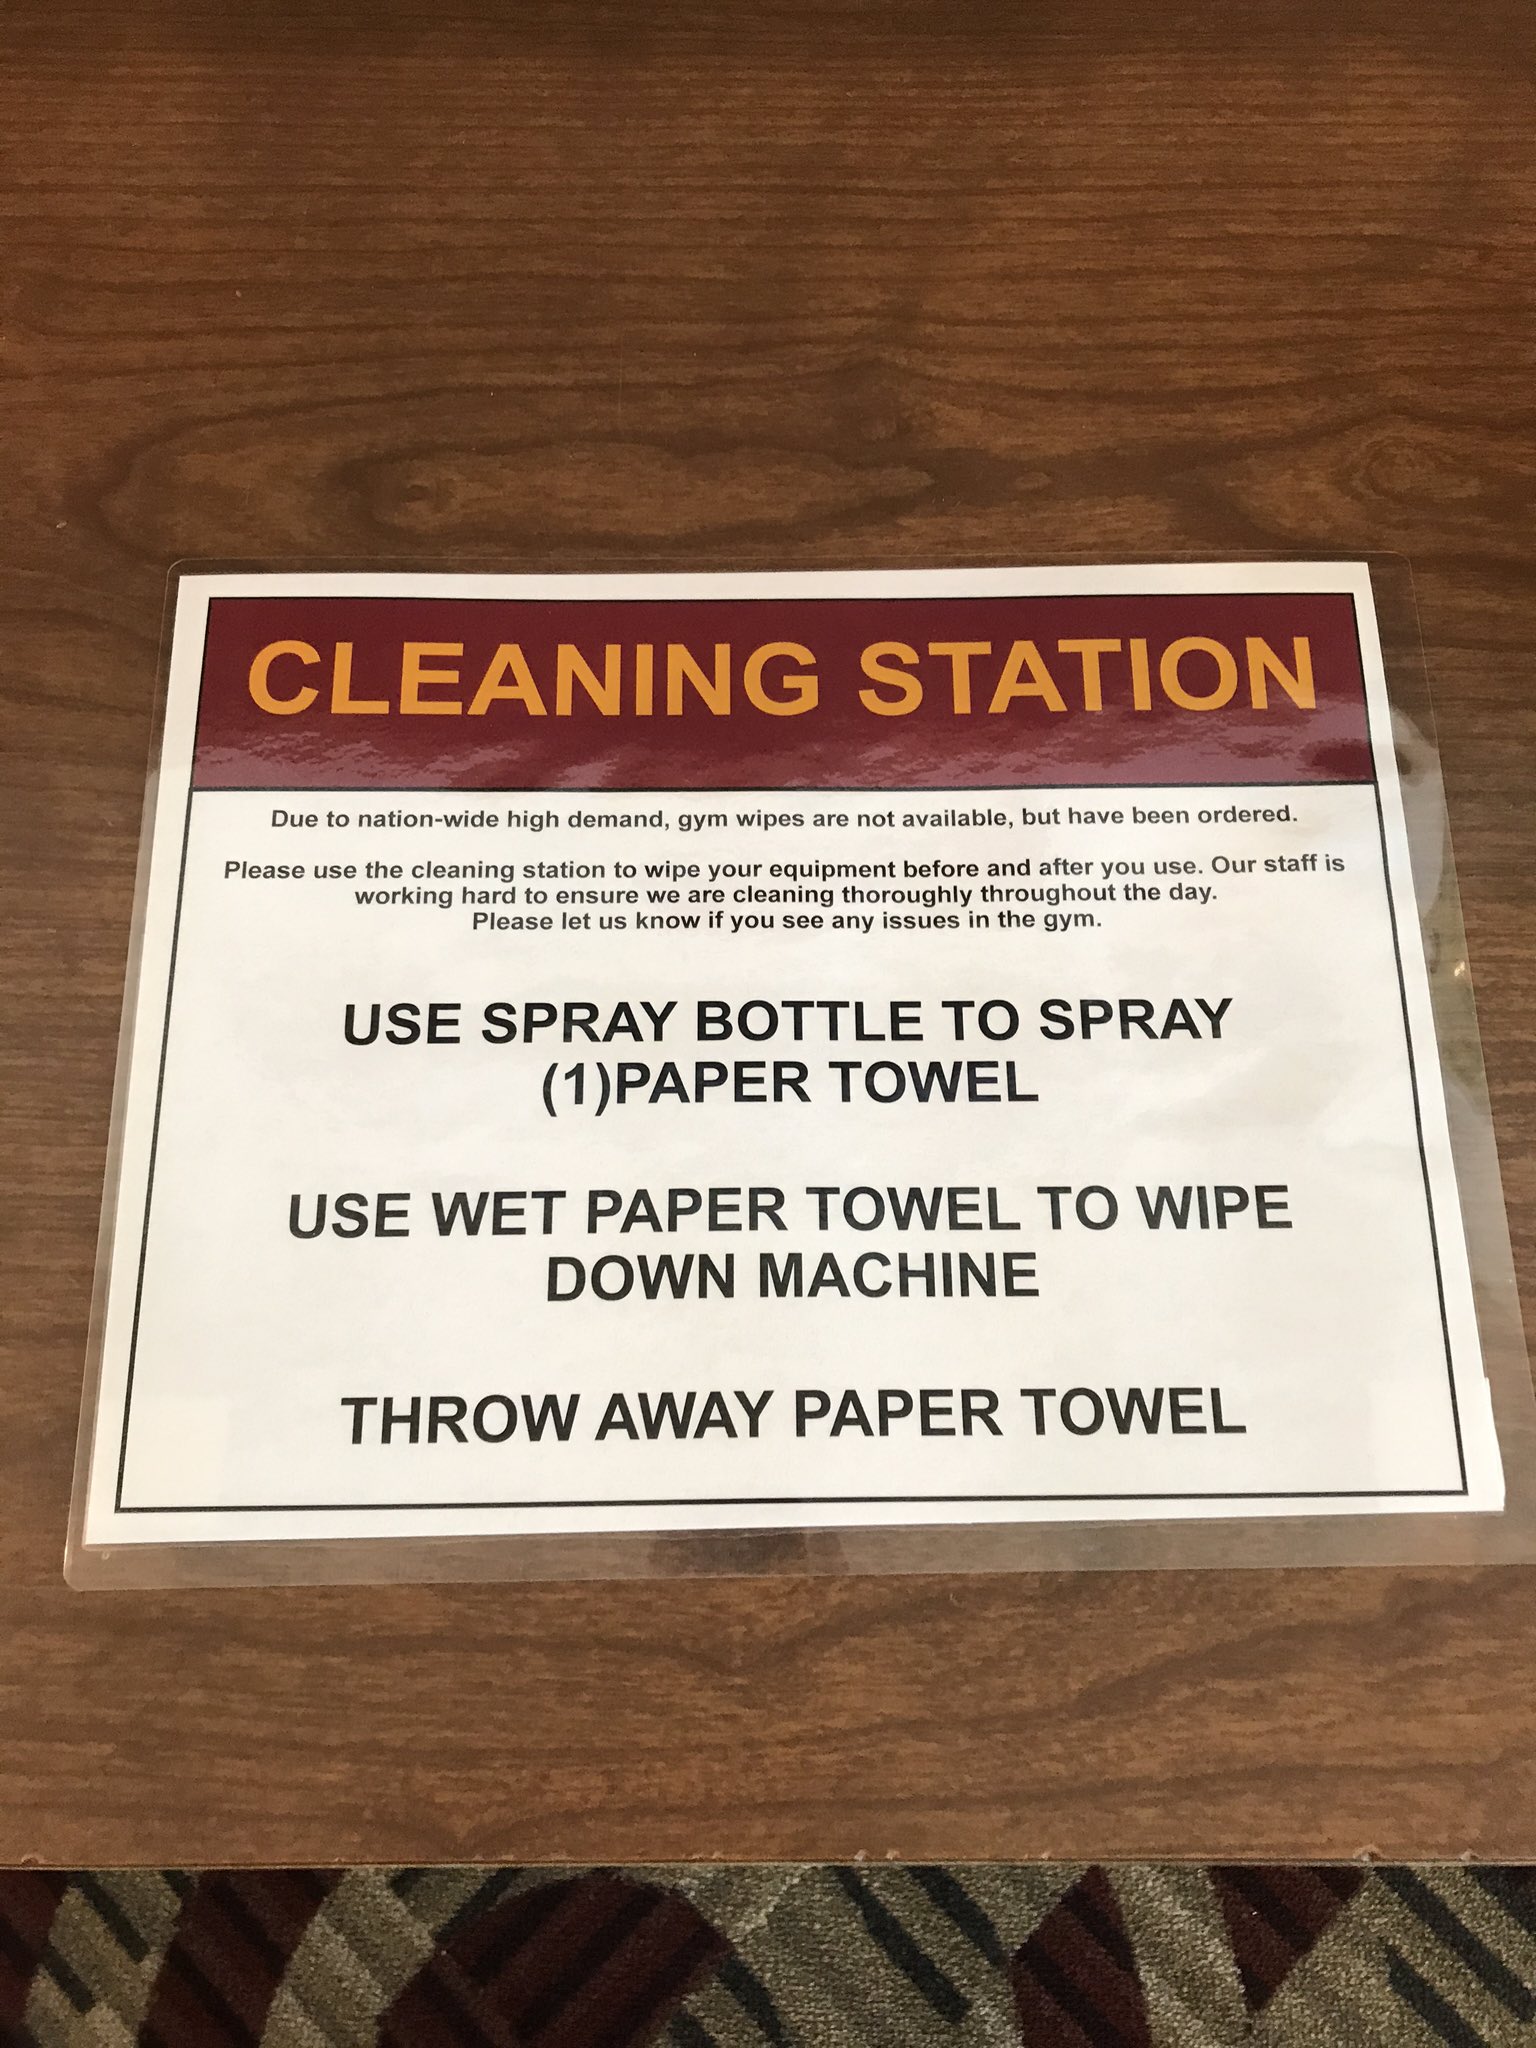 Wellness Center has cleaning guidelines to stay safe